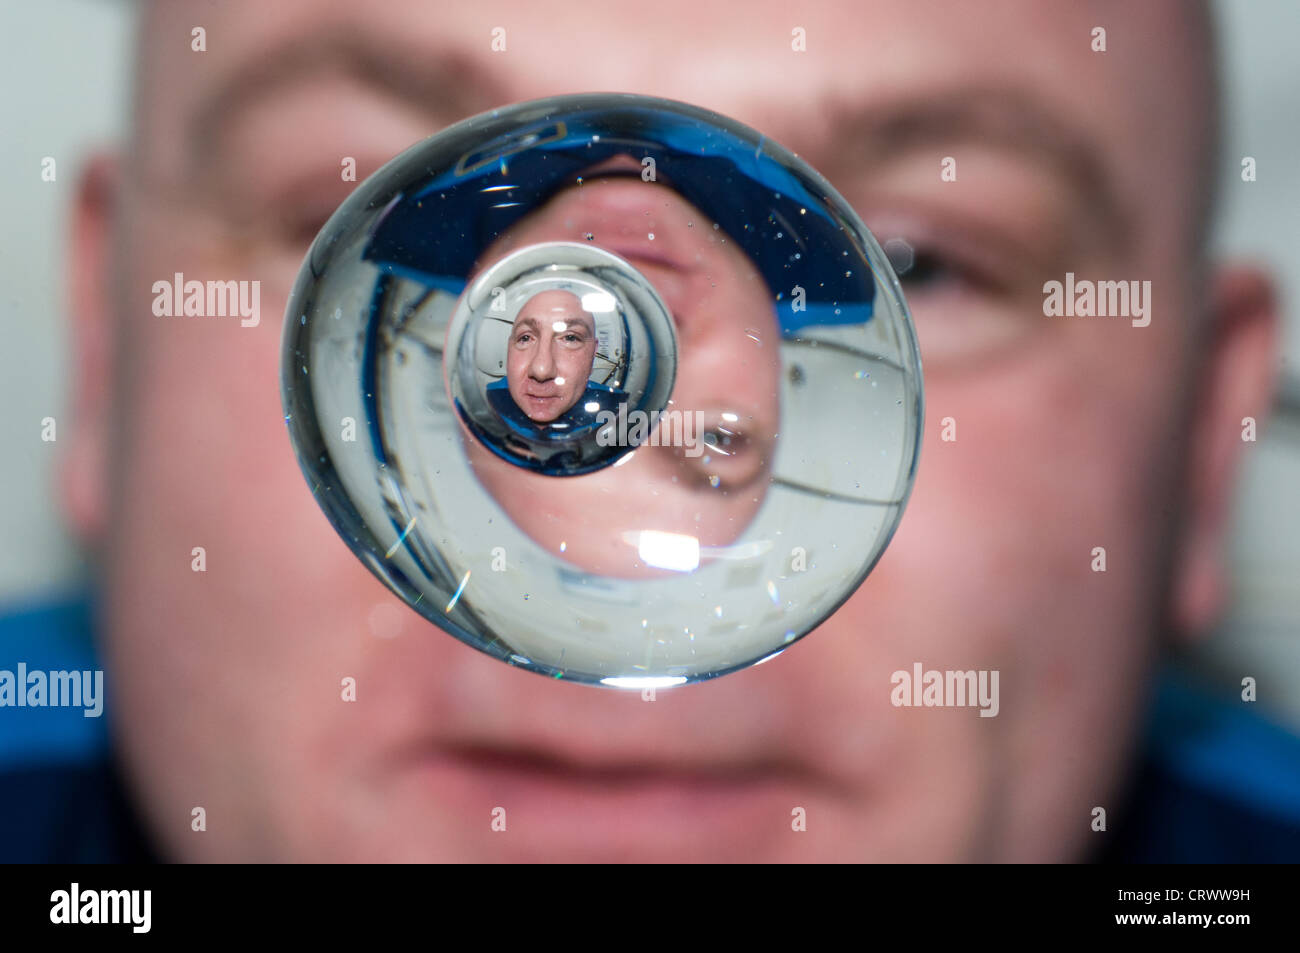 European Space Agency astronaut Andre Kuipers watches a water bubble showing his reflected image float freely in zero gravity aboard the International Space Station June 24, 2012. Stock Photo